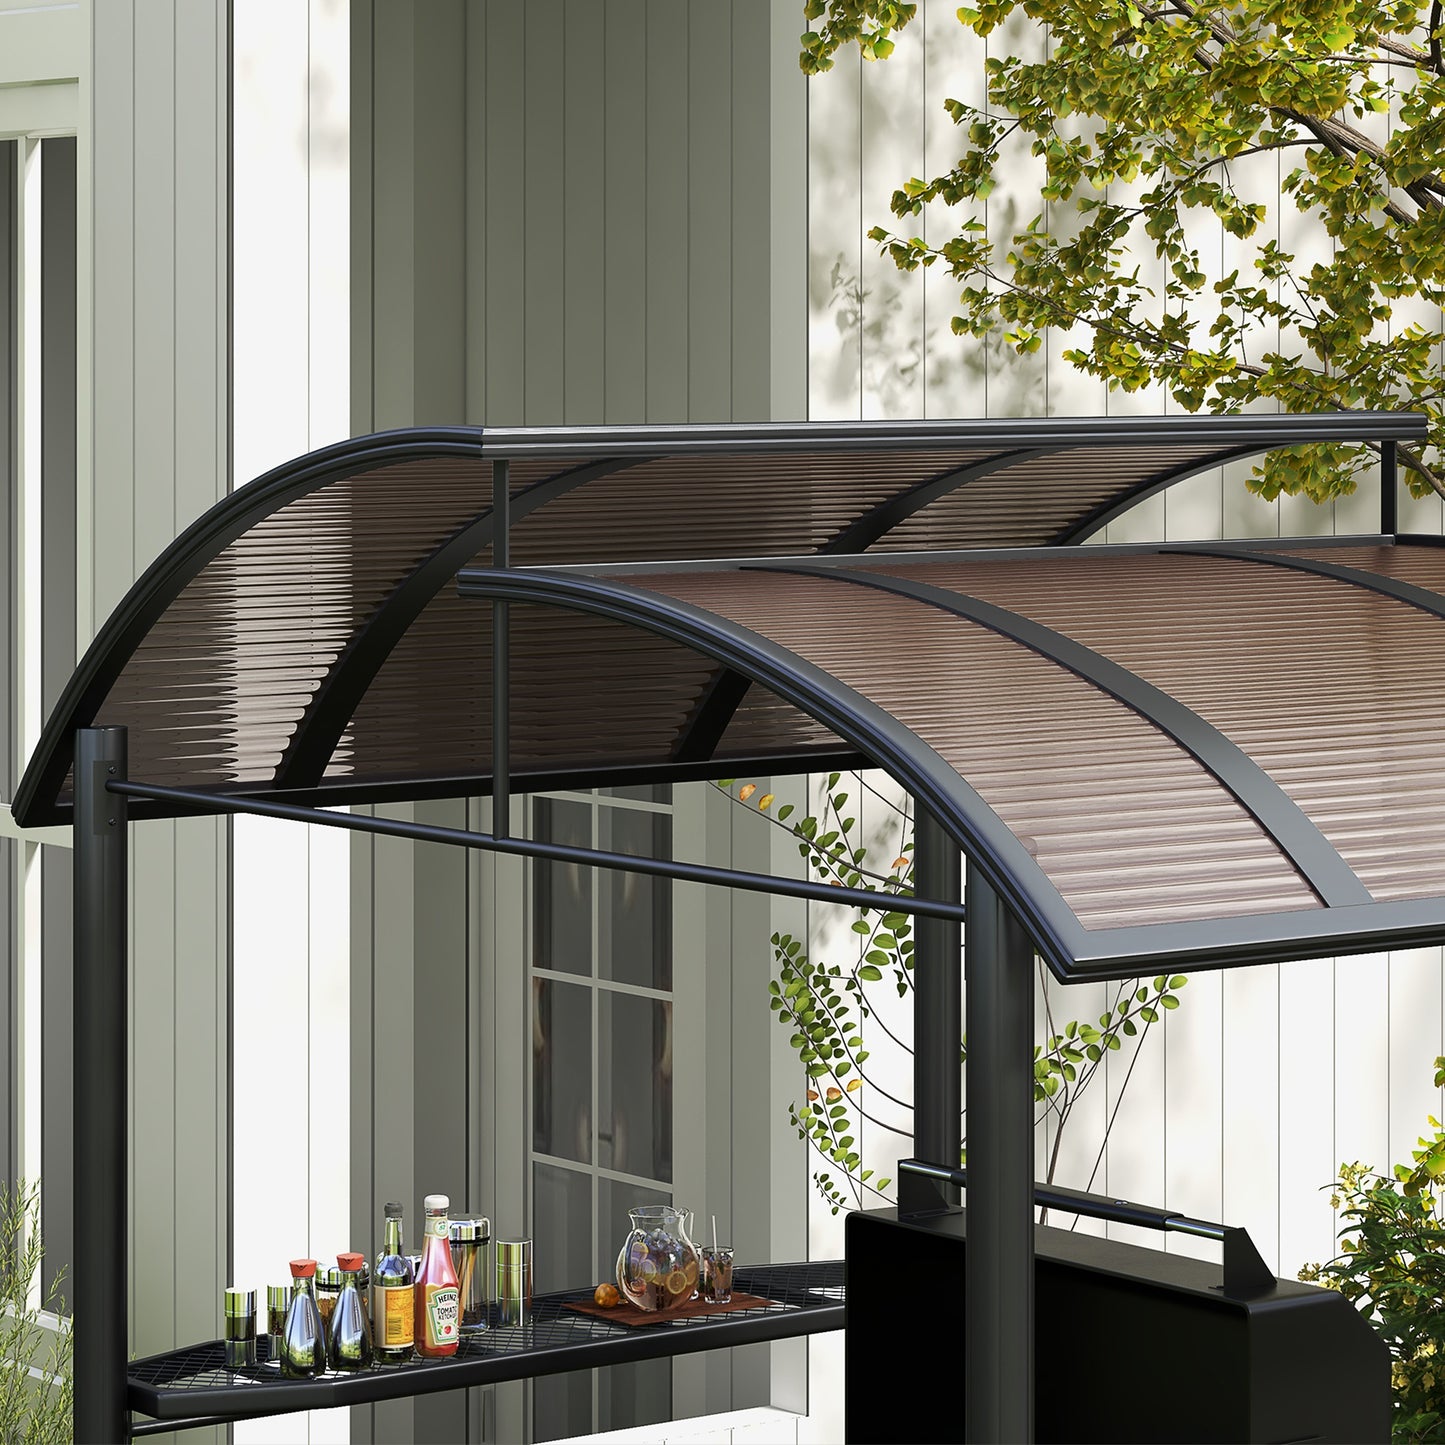 Outsunny 2.4 x 1.5m Outdoor Grill Gazebo with Side Shelves, PC Board Roof, Dark Grey